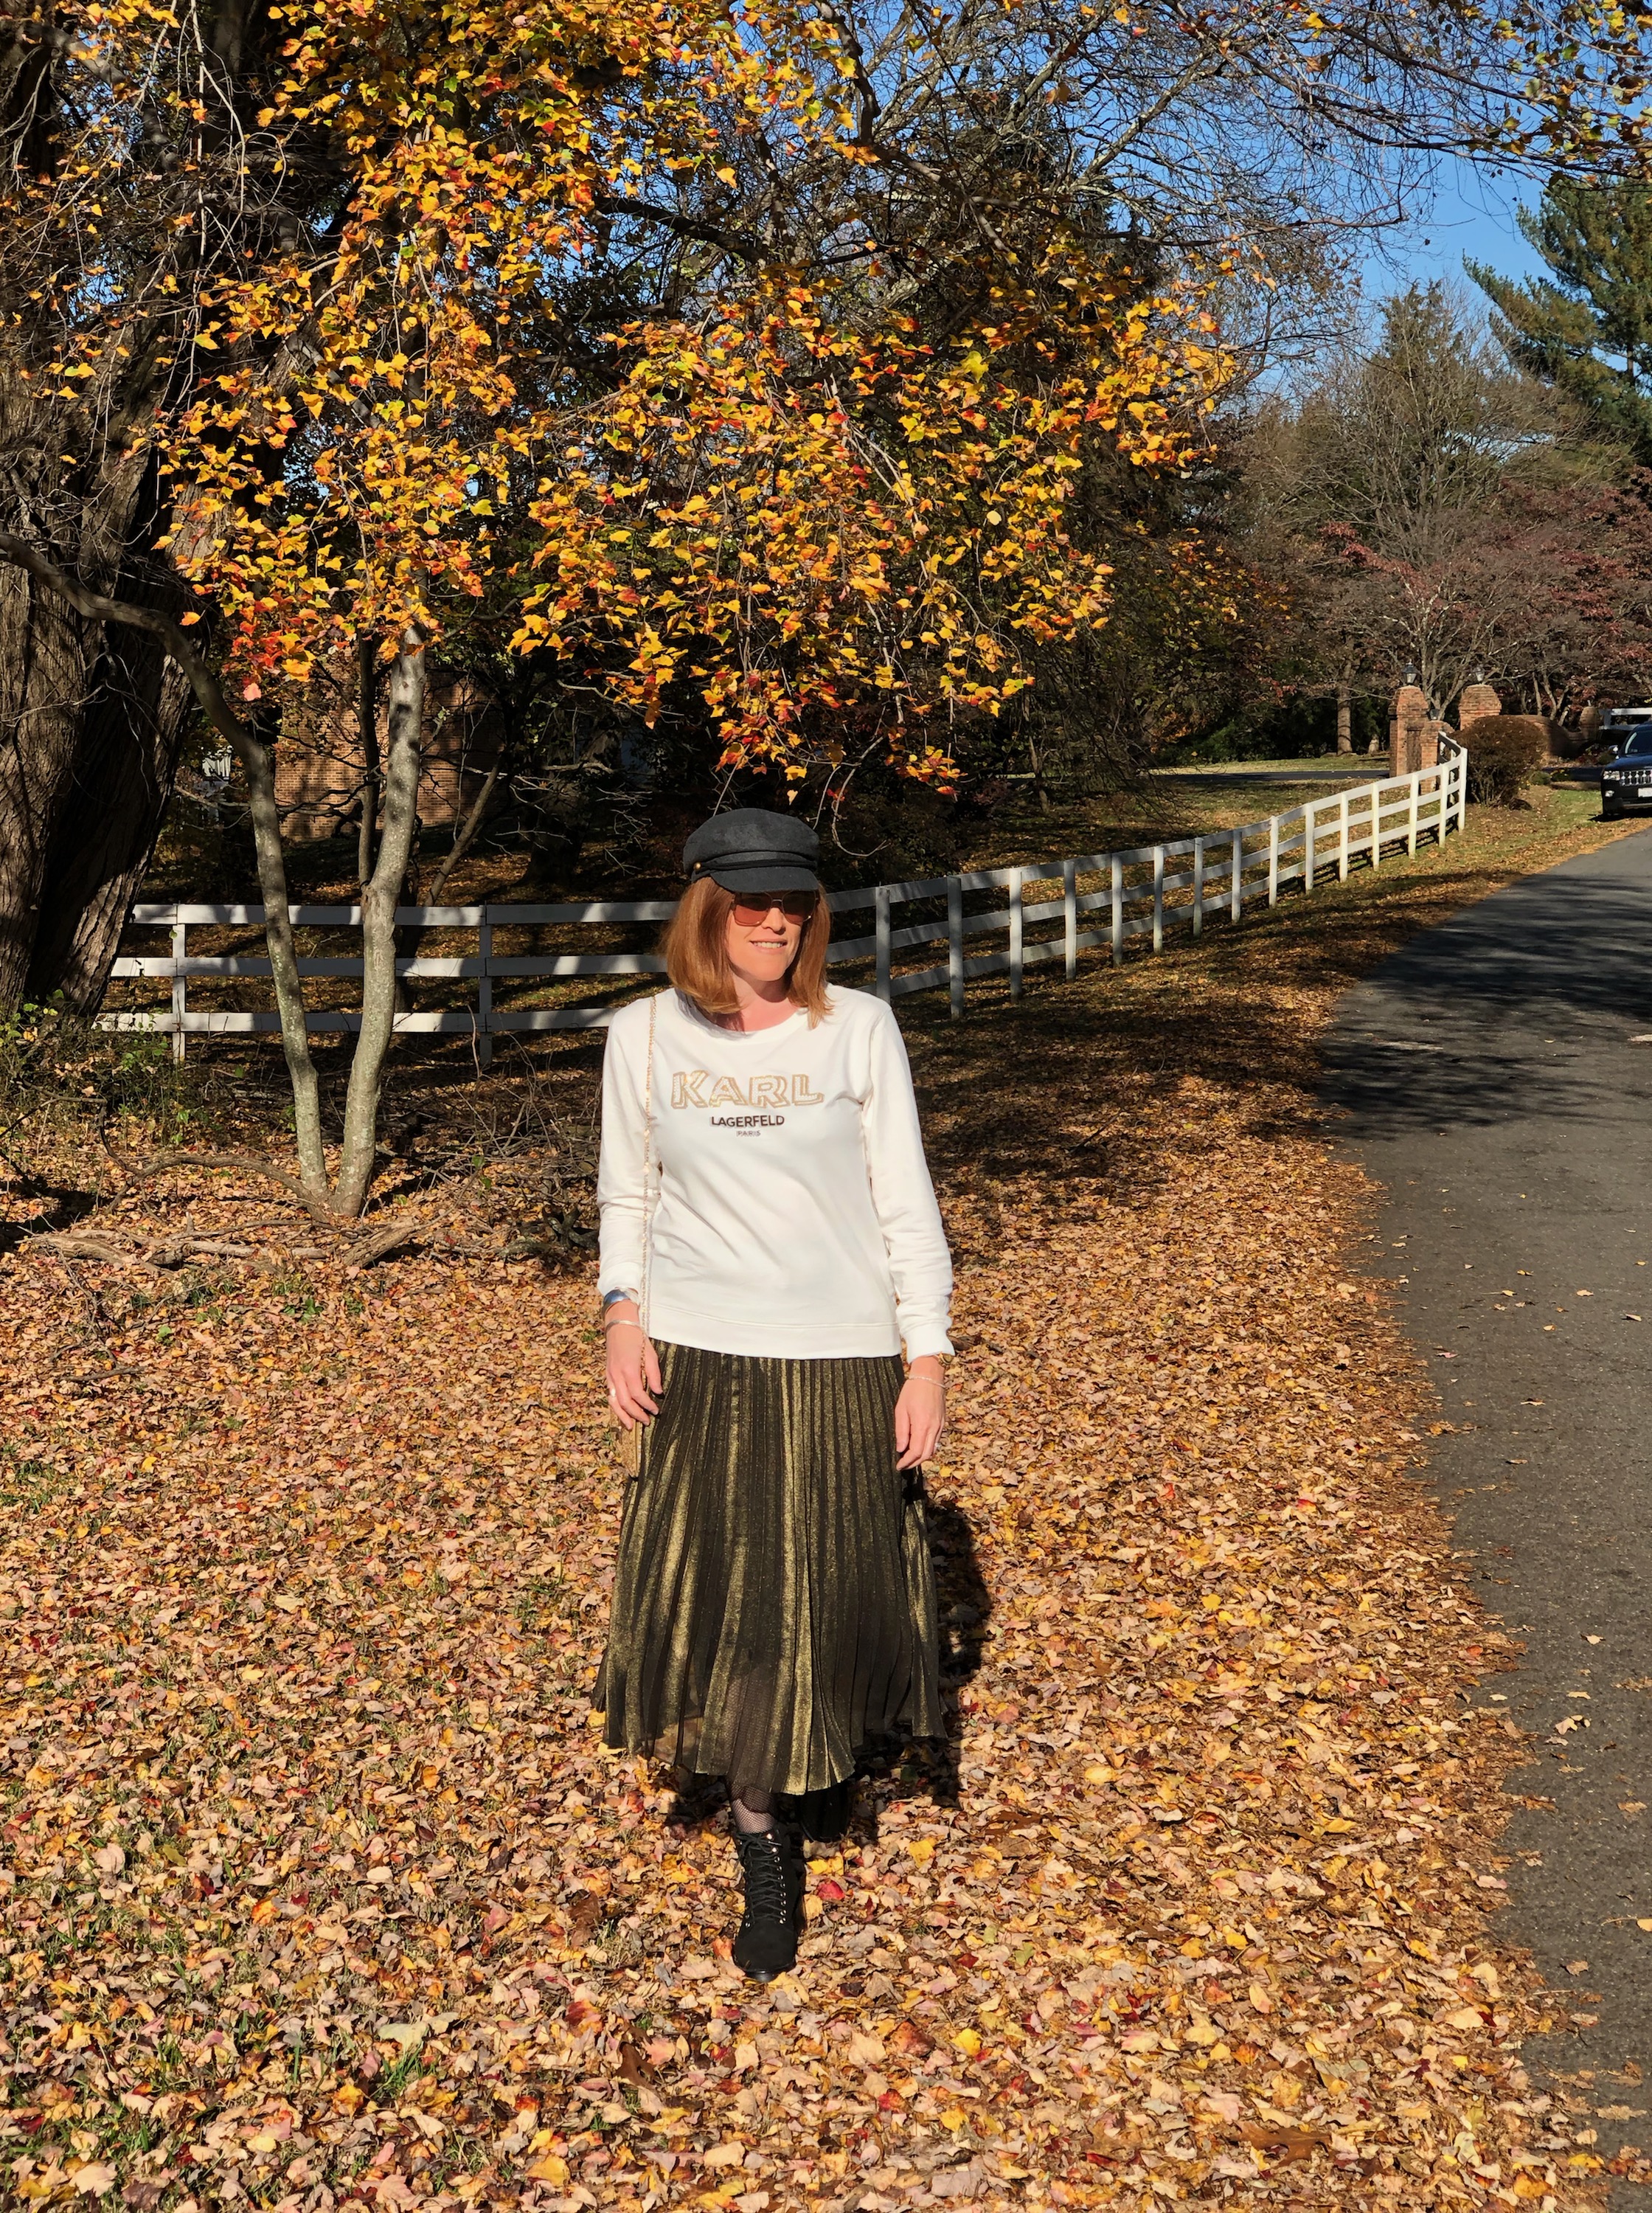 The Holiday Series 2018: Boho Chic Thanksgiving Outfit